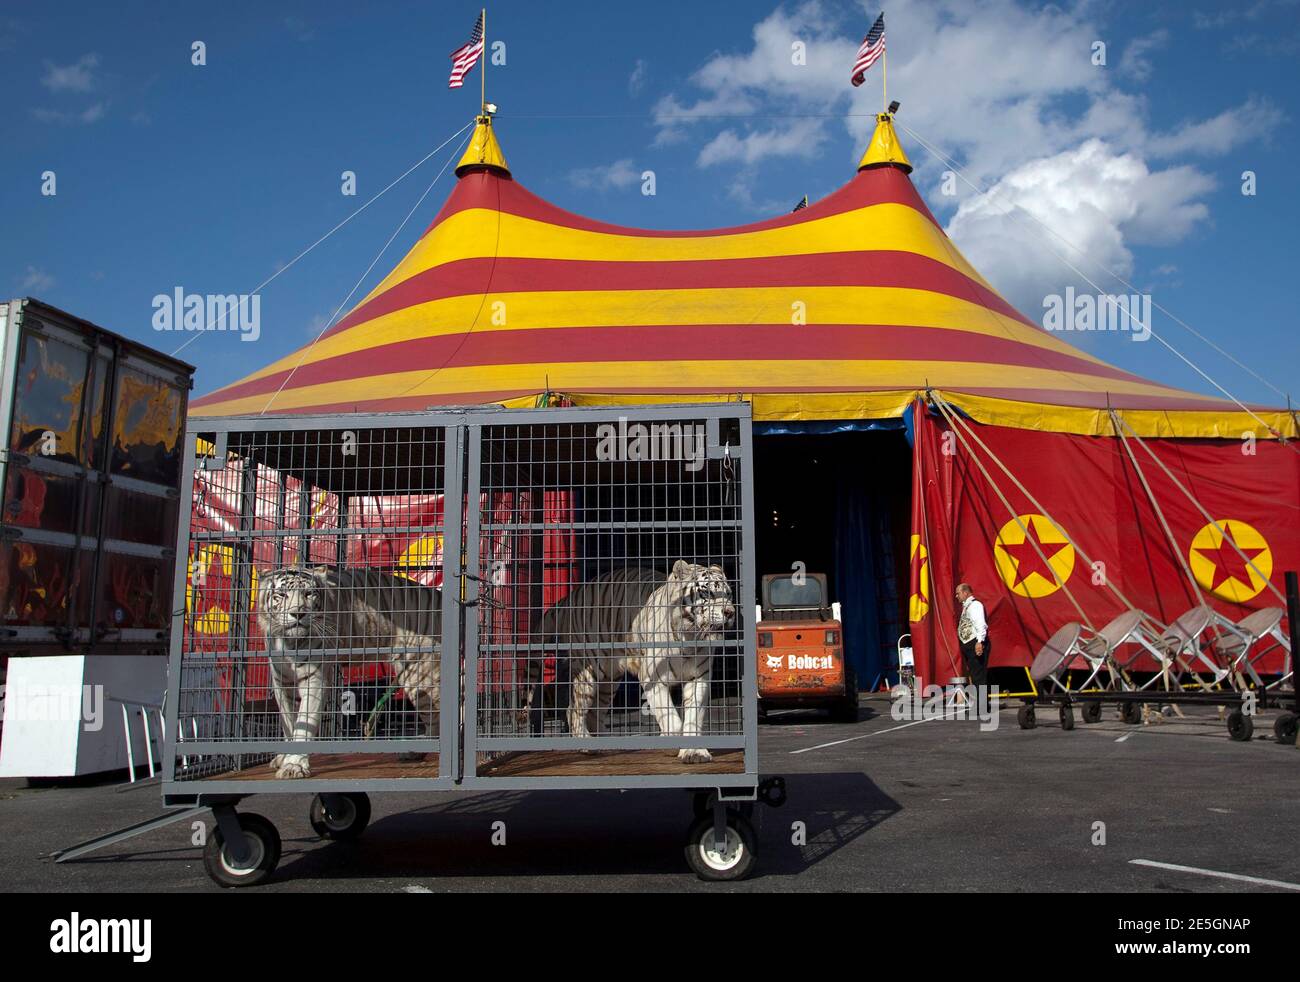 White Tiger Circus High Resolution Stock Photography And Images Alamy